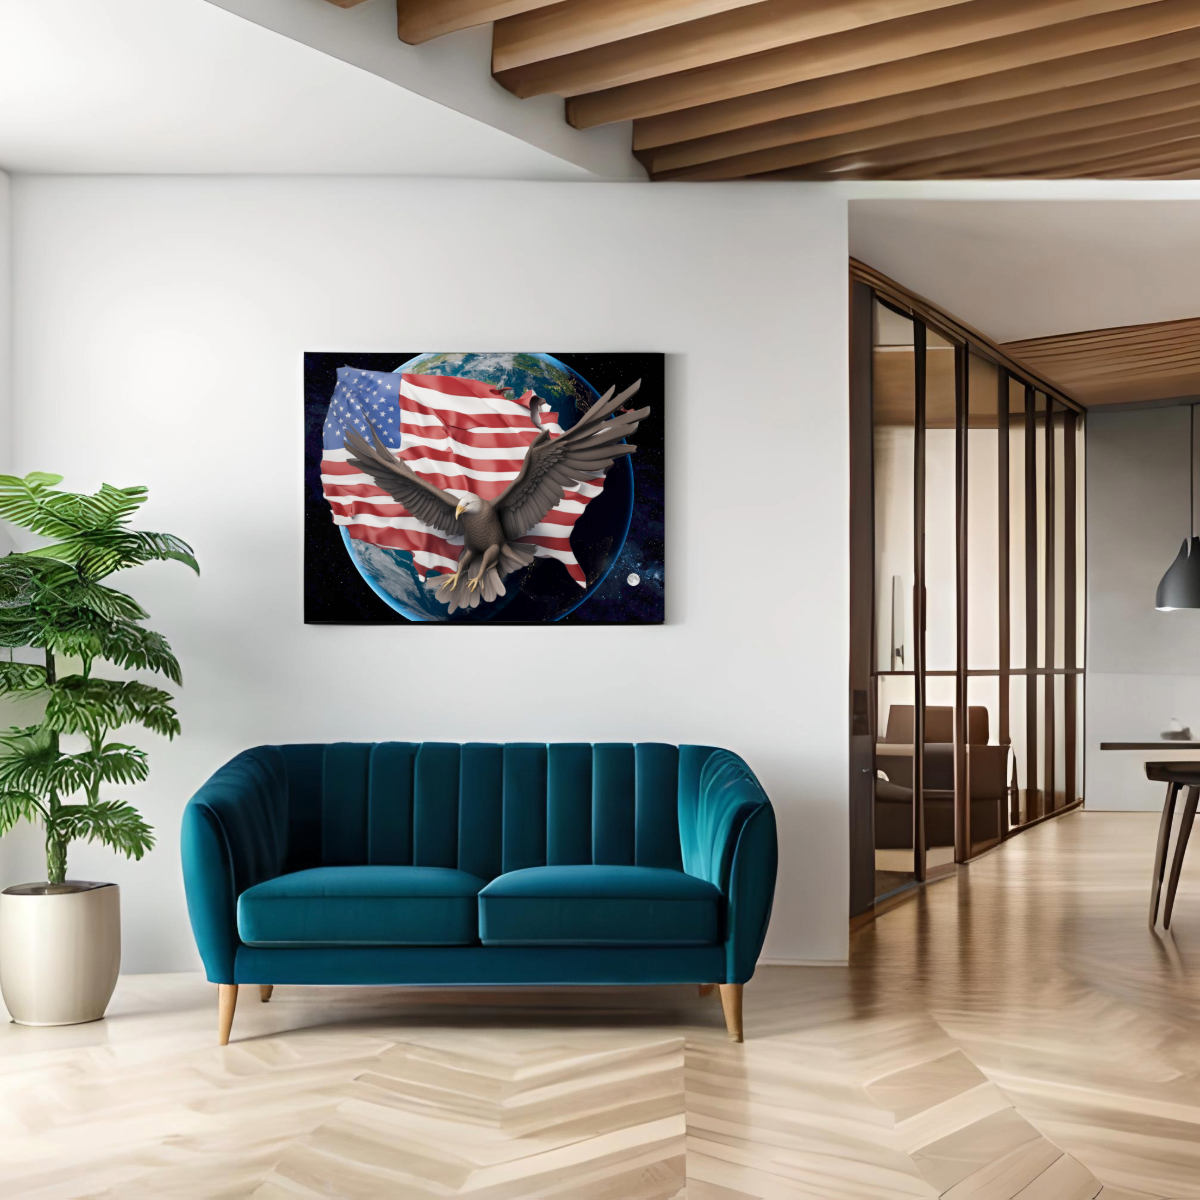 Wall Art AMERICAN FLAG #4 Canvas Print Painting Giclee GW Love Patriot Beauty Design House Home Decor Office Gift Ready to Hang